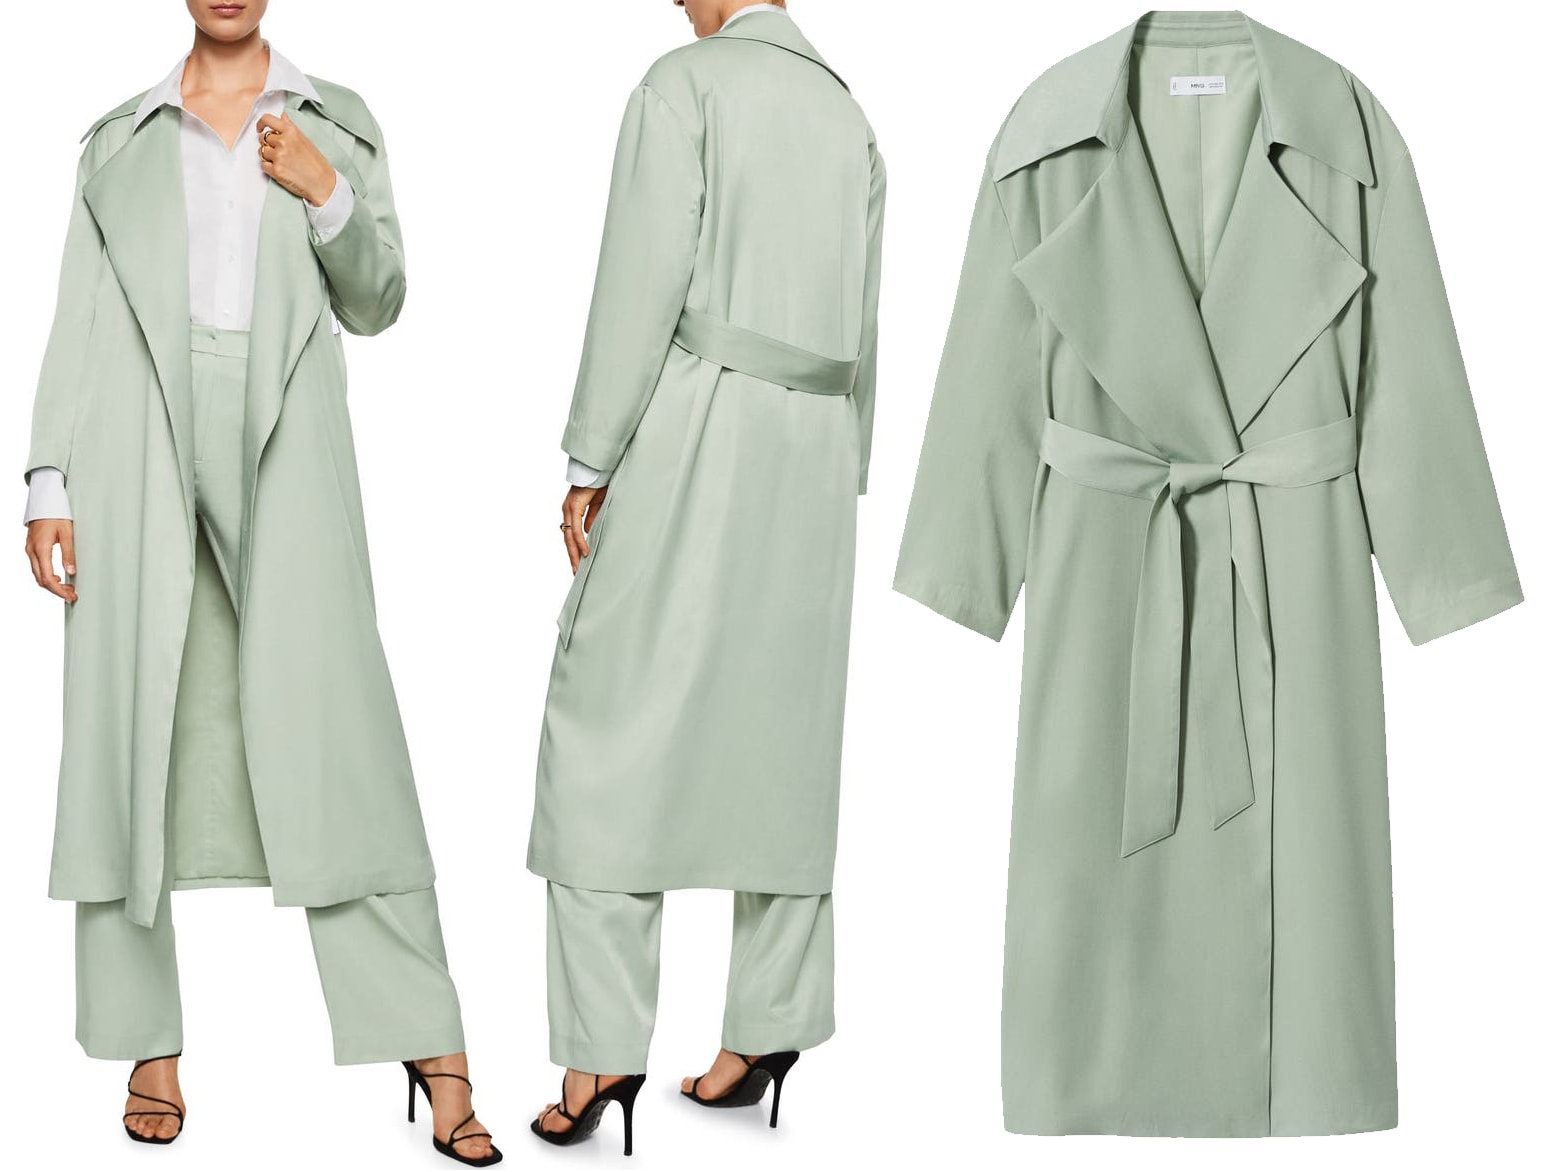 This Mango trench coat features a fluid silhouette and comes in a soft pastel green hue